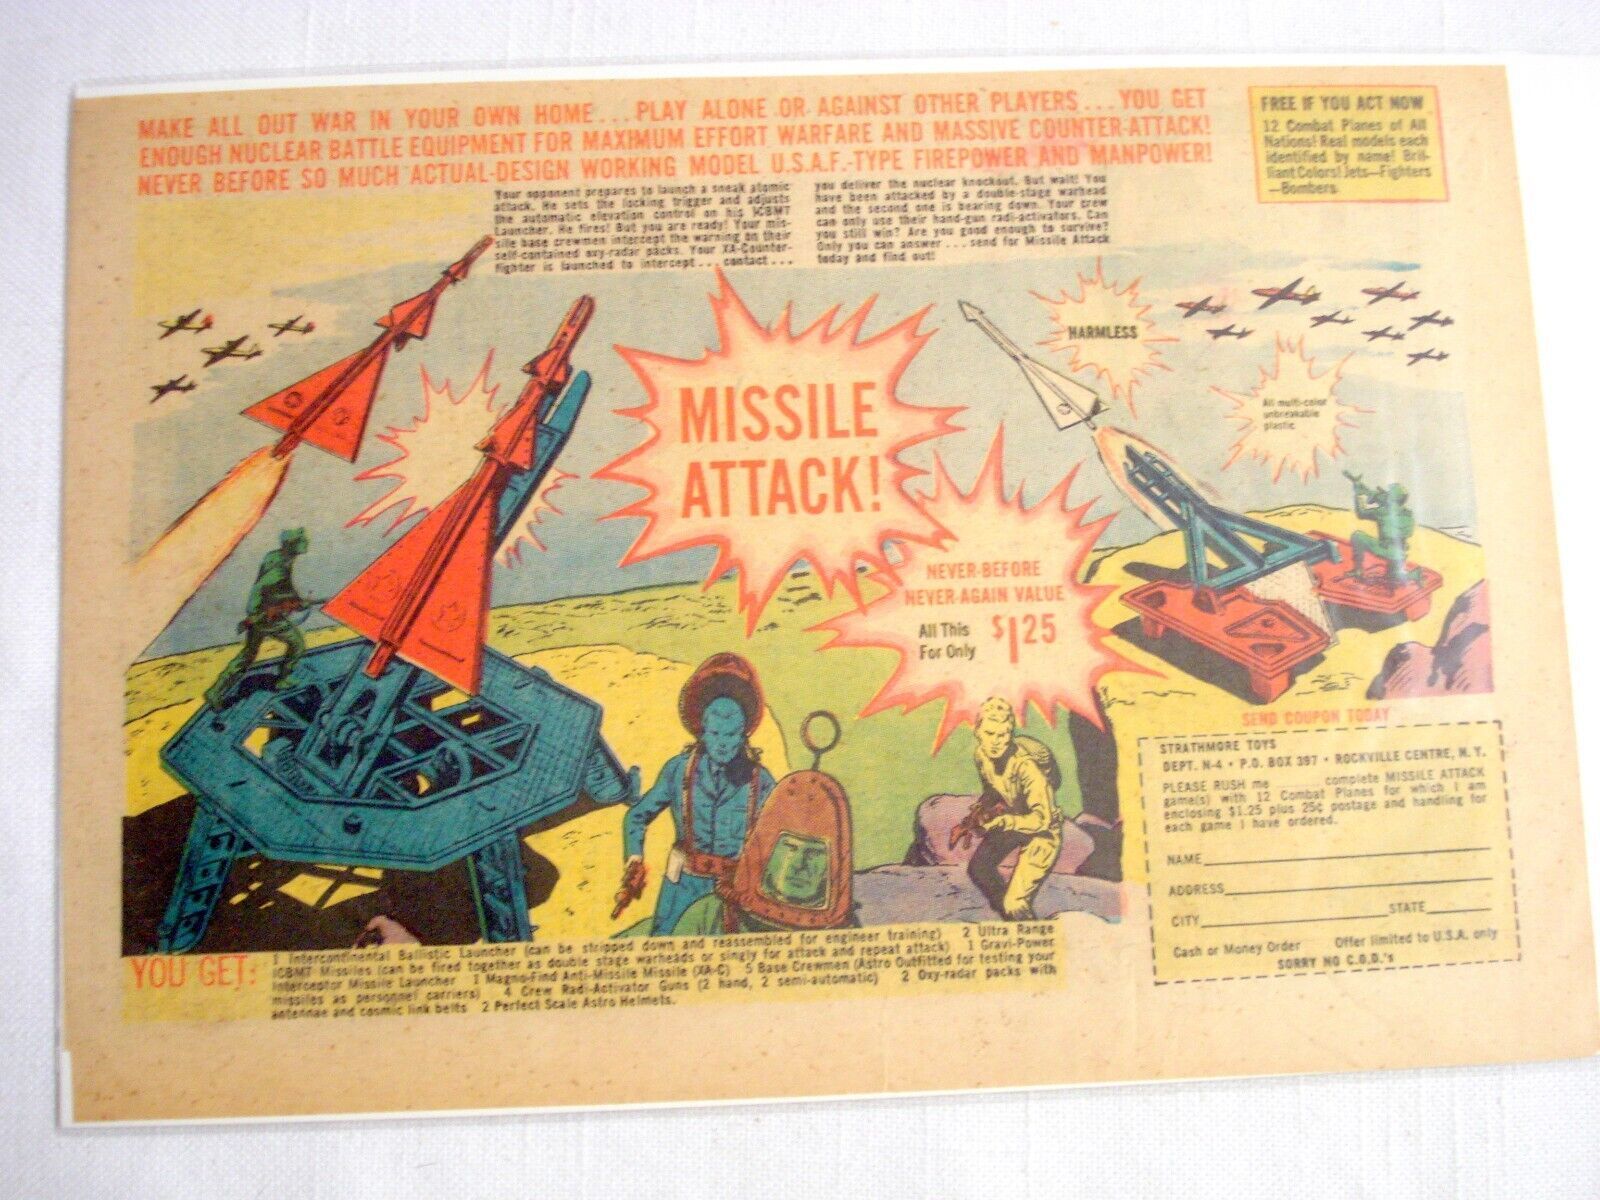 Primary image for 1963 Ad Missile Attack by Strathmore Toys, Rockville Center, N. Y.